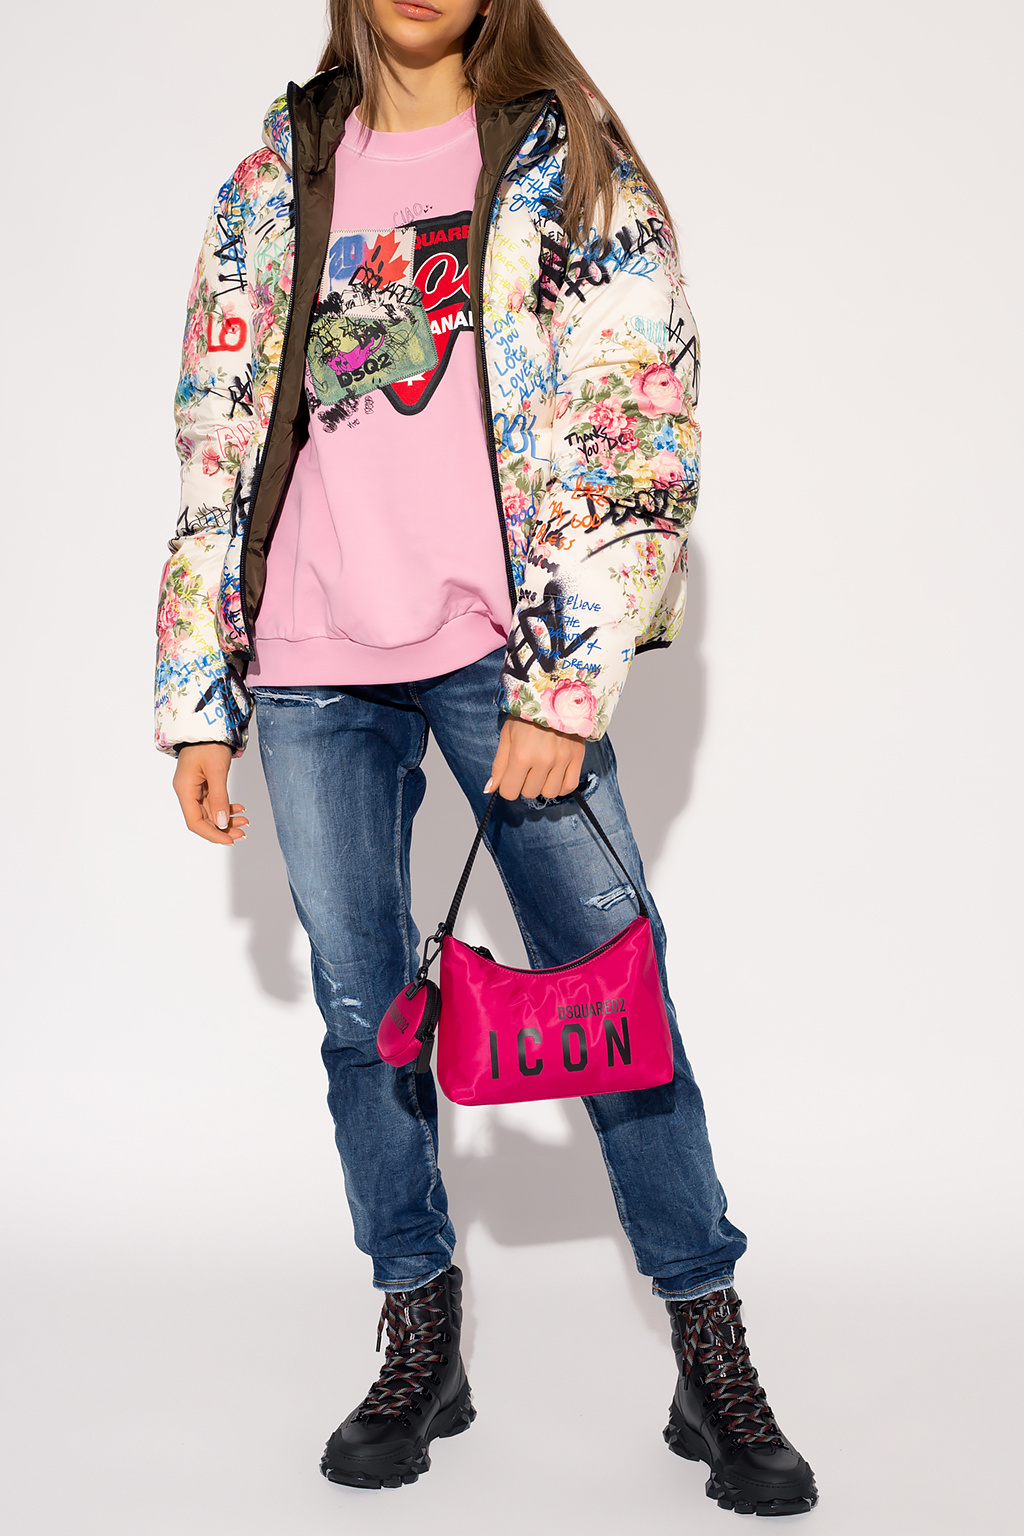 Dsquared2 'Granny's Flower’ quilted Cream jacket